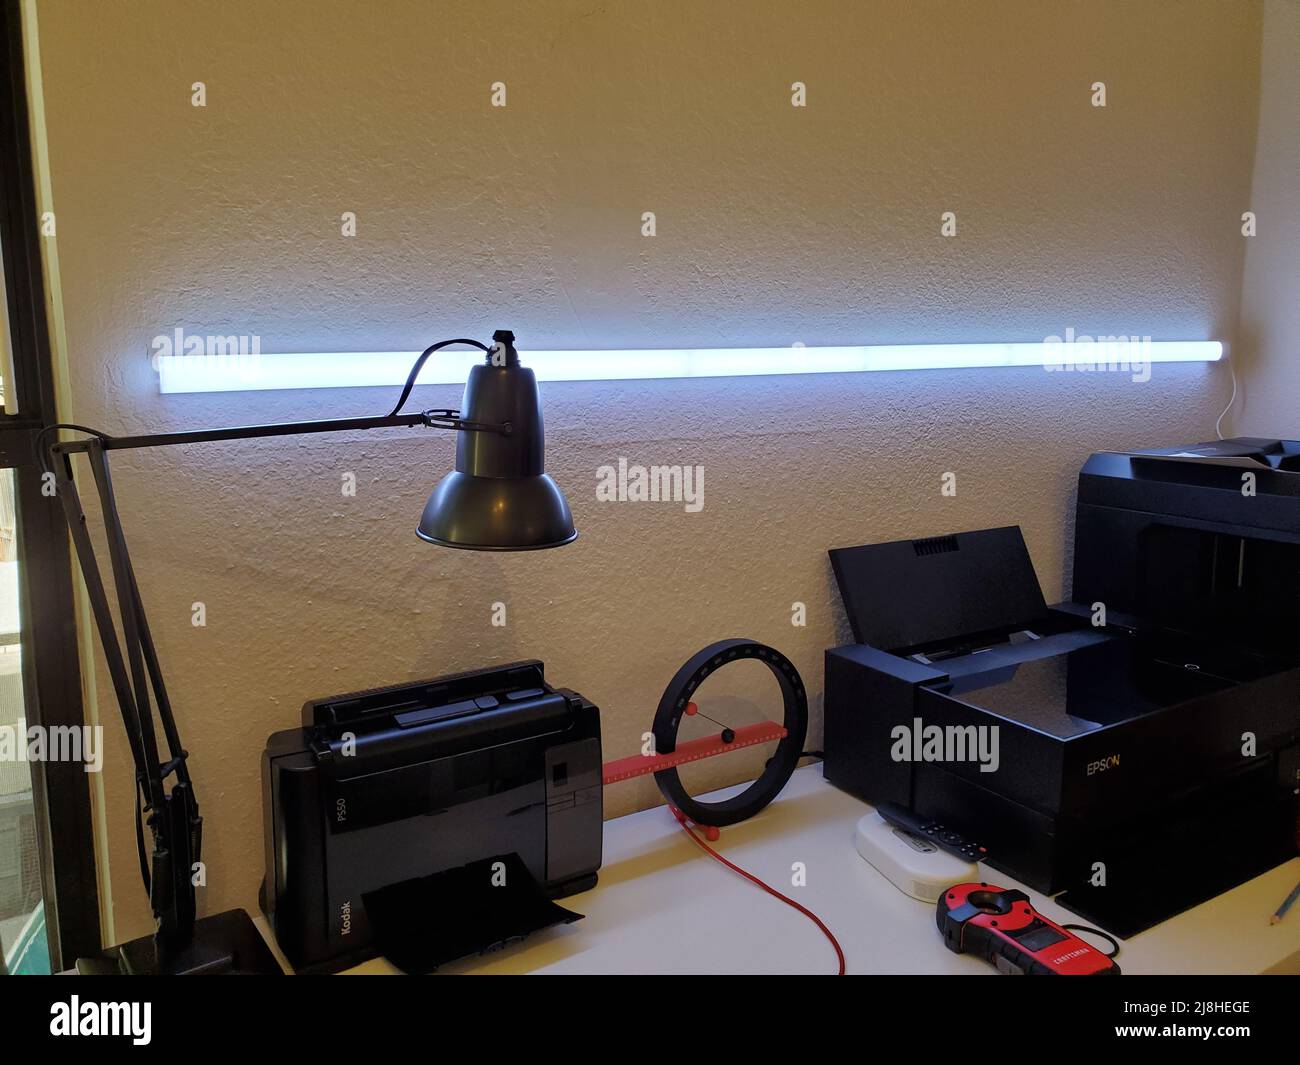 Govee Glide LED smart wall light installed in an office setting, Lafayette, California, February 23, 2022. Photo courtesy Tech Trends. Stock Photo